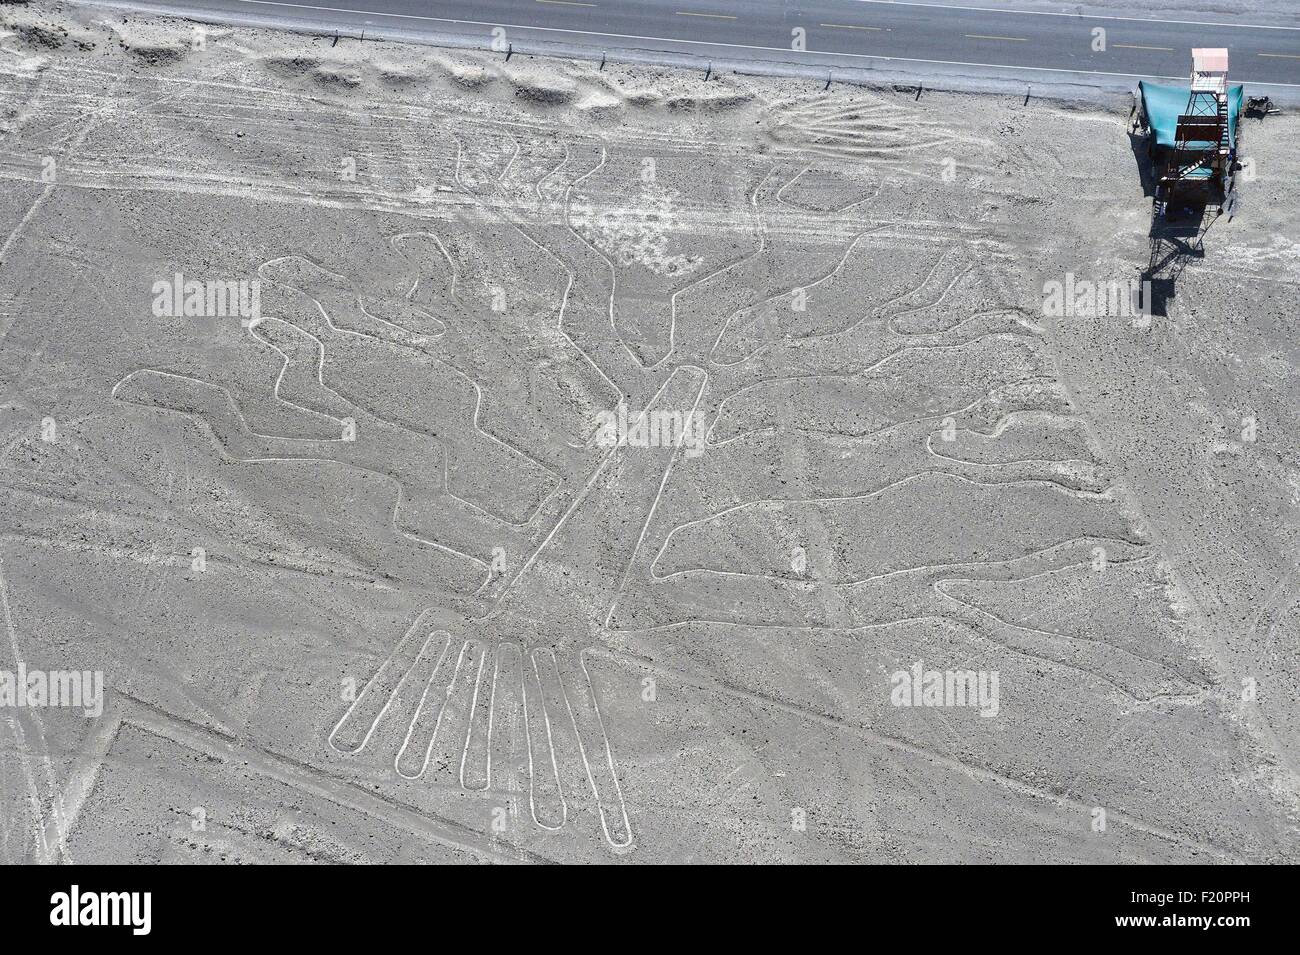 Peru, Ica Region, Nazca Desert, the Nazca Lines (5th-7th century), listed as World Heritage site by UNESCO, the geoglyphs are large figures drawn on the ground, often stylized animals, three, aerial view Stock Photo